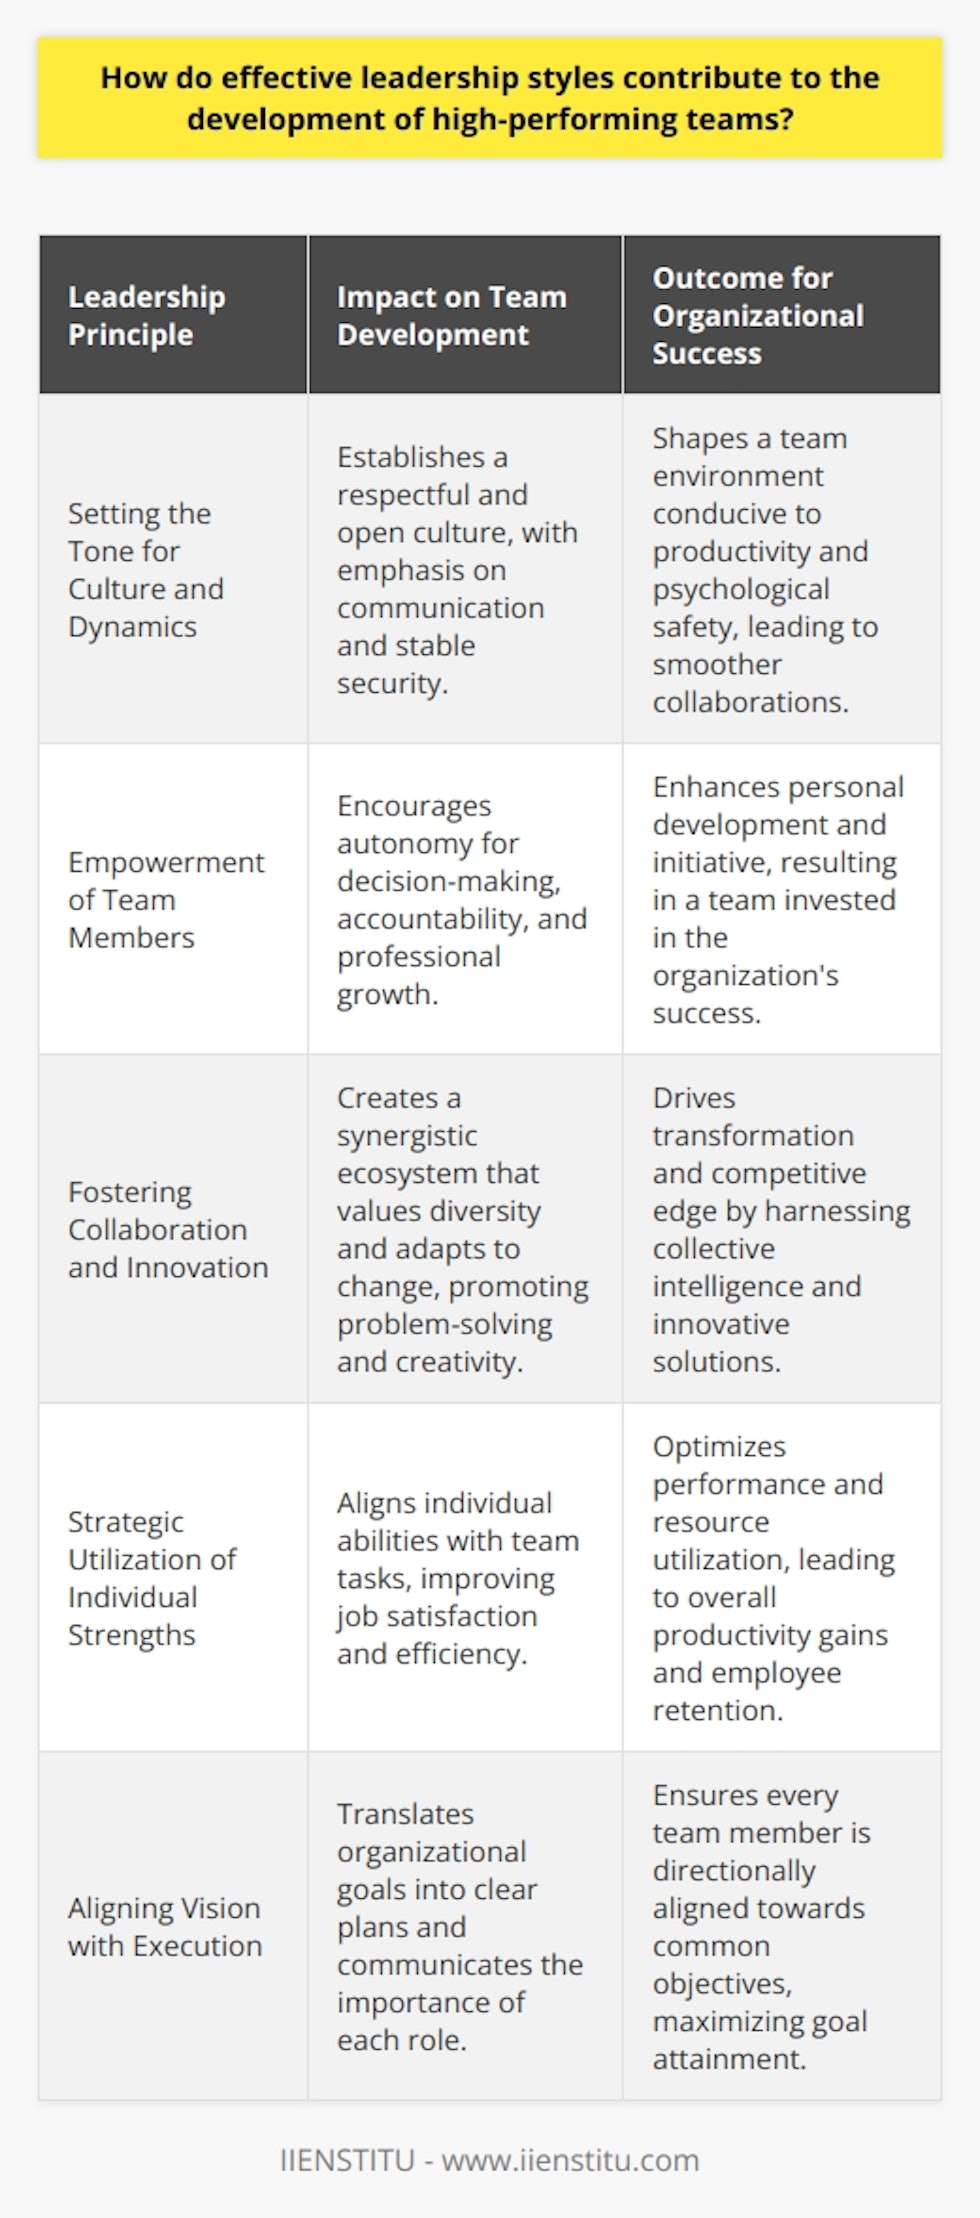 High-performing teams are often the engine that drives organizational success, and at the core of these teams lie effective leadership styles. When leaders navigate the complex landscape of team management with the right mix of leadership approaches, they can unlock the full potential of their teams.Role of Leadership in Team DynamicsLeaders set the tone for team culture and dynamics, acting as role models for communication and behavior. Effective leadership styles encourage a culture of respect and openness, where every team member feels that their voice is heard and valued. Leaders who communicate expectations clearly and provide consistent feedback help establish a sense of security and stability within the team, which is vital for fostering a high-performing environment.Empowering Team MembersAn effective leader knows the power of empowerment. By entrusting team members with responsibilities and the autonomy to make decisions, leaders nurture a sense of ownership and accountability. Empowerment also stretches the abilities of team members, pushing them to grow and challenge themselves, which ultimately contributes to both personal and team performance.When leadership is seen not just as a means to an end but as an enabler of team potential, the members of the team gain confidence and contribute with greater enthusiasm. Leaders who encourage professional development and recognize individual achievements build a strong foundation for a highly motivated team.Cultivating Collaboration and InnovationIn high-performing teams, collaboration is the keystone of their success, and that is greatly influenced by the leader's style. Leaders who foster an environment where team members can collaborate without fear of negative competition create a fertile ground for innovation. This includes valuing diverse perspectives and promoting synergies between different skill sets.Effective leaders also understand the importance of adaptability, encouraging teams to remain flexible and responsive to changes. This adaptive culture can help teams navigate through uncertainties and turn challenges into opportunities for growth.Strategic Utilization of StrengthsAn integral aspect of leadership is the ability to recognize each team member's unique strengths and strategically utilize them towards the team's objectives. Leaders who excel at this are able to align tasks with the natural competencies of individuals, leading to increased efficiency and job satisfaction. When team members feel that their strengths are recognized and valued, they are more likely to be committed to their work and to the team.Creating Synergy Between Vision and ExecutionFinally, the role of effective leadership is not just about managing people or tasks but about aligning the team with the larger vision of the organization. Leaders who excel at translating big-picture goals into actionable plans set their teams up for success. By clearly communicating the team's purpose and the importance of each member's contributions, leaders can create a unified focus that drives performance.ConclusionEffective leadership is indispensable for crafting high-performing teams. Through strategic communication, empowerment, and an ability to capitalize on each member's strengths, leaders can lay the groundwork for not just meeting but exceeding organizational goals. It is the nuanced and adaptive application of different leadership styles that ensures teams remain resilient, motivated, and ultimately, high-performing.